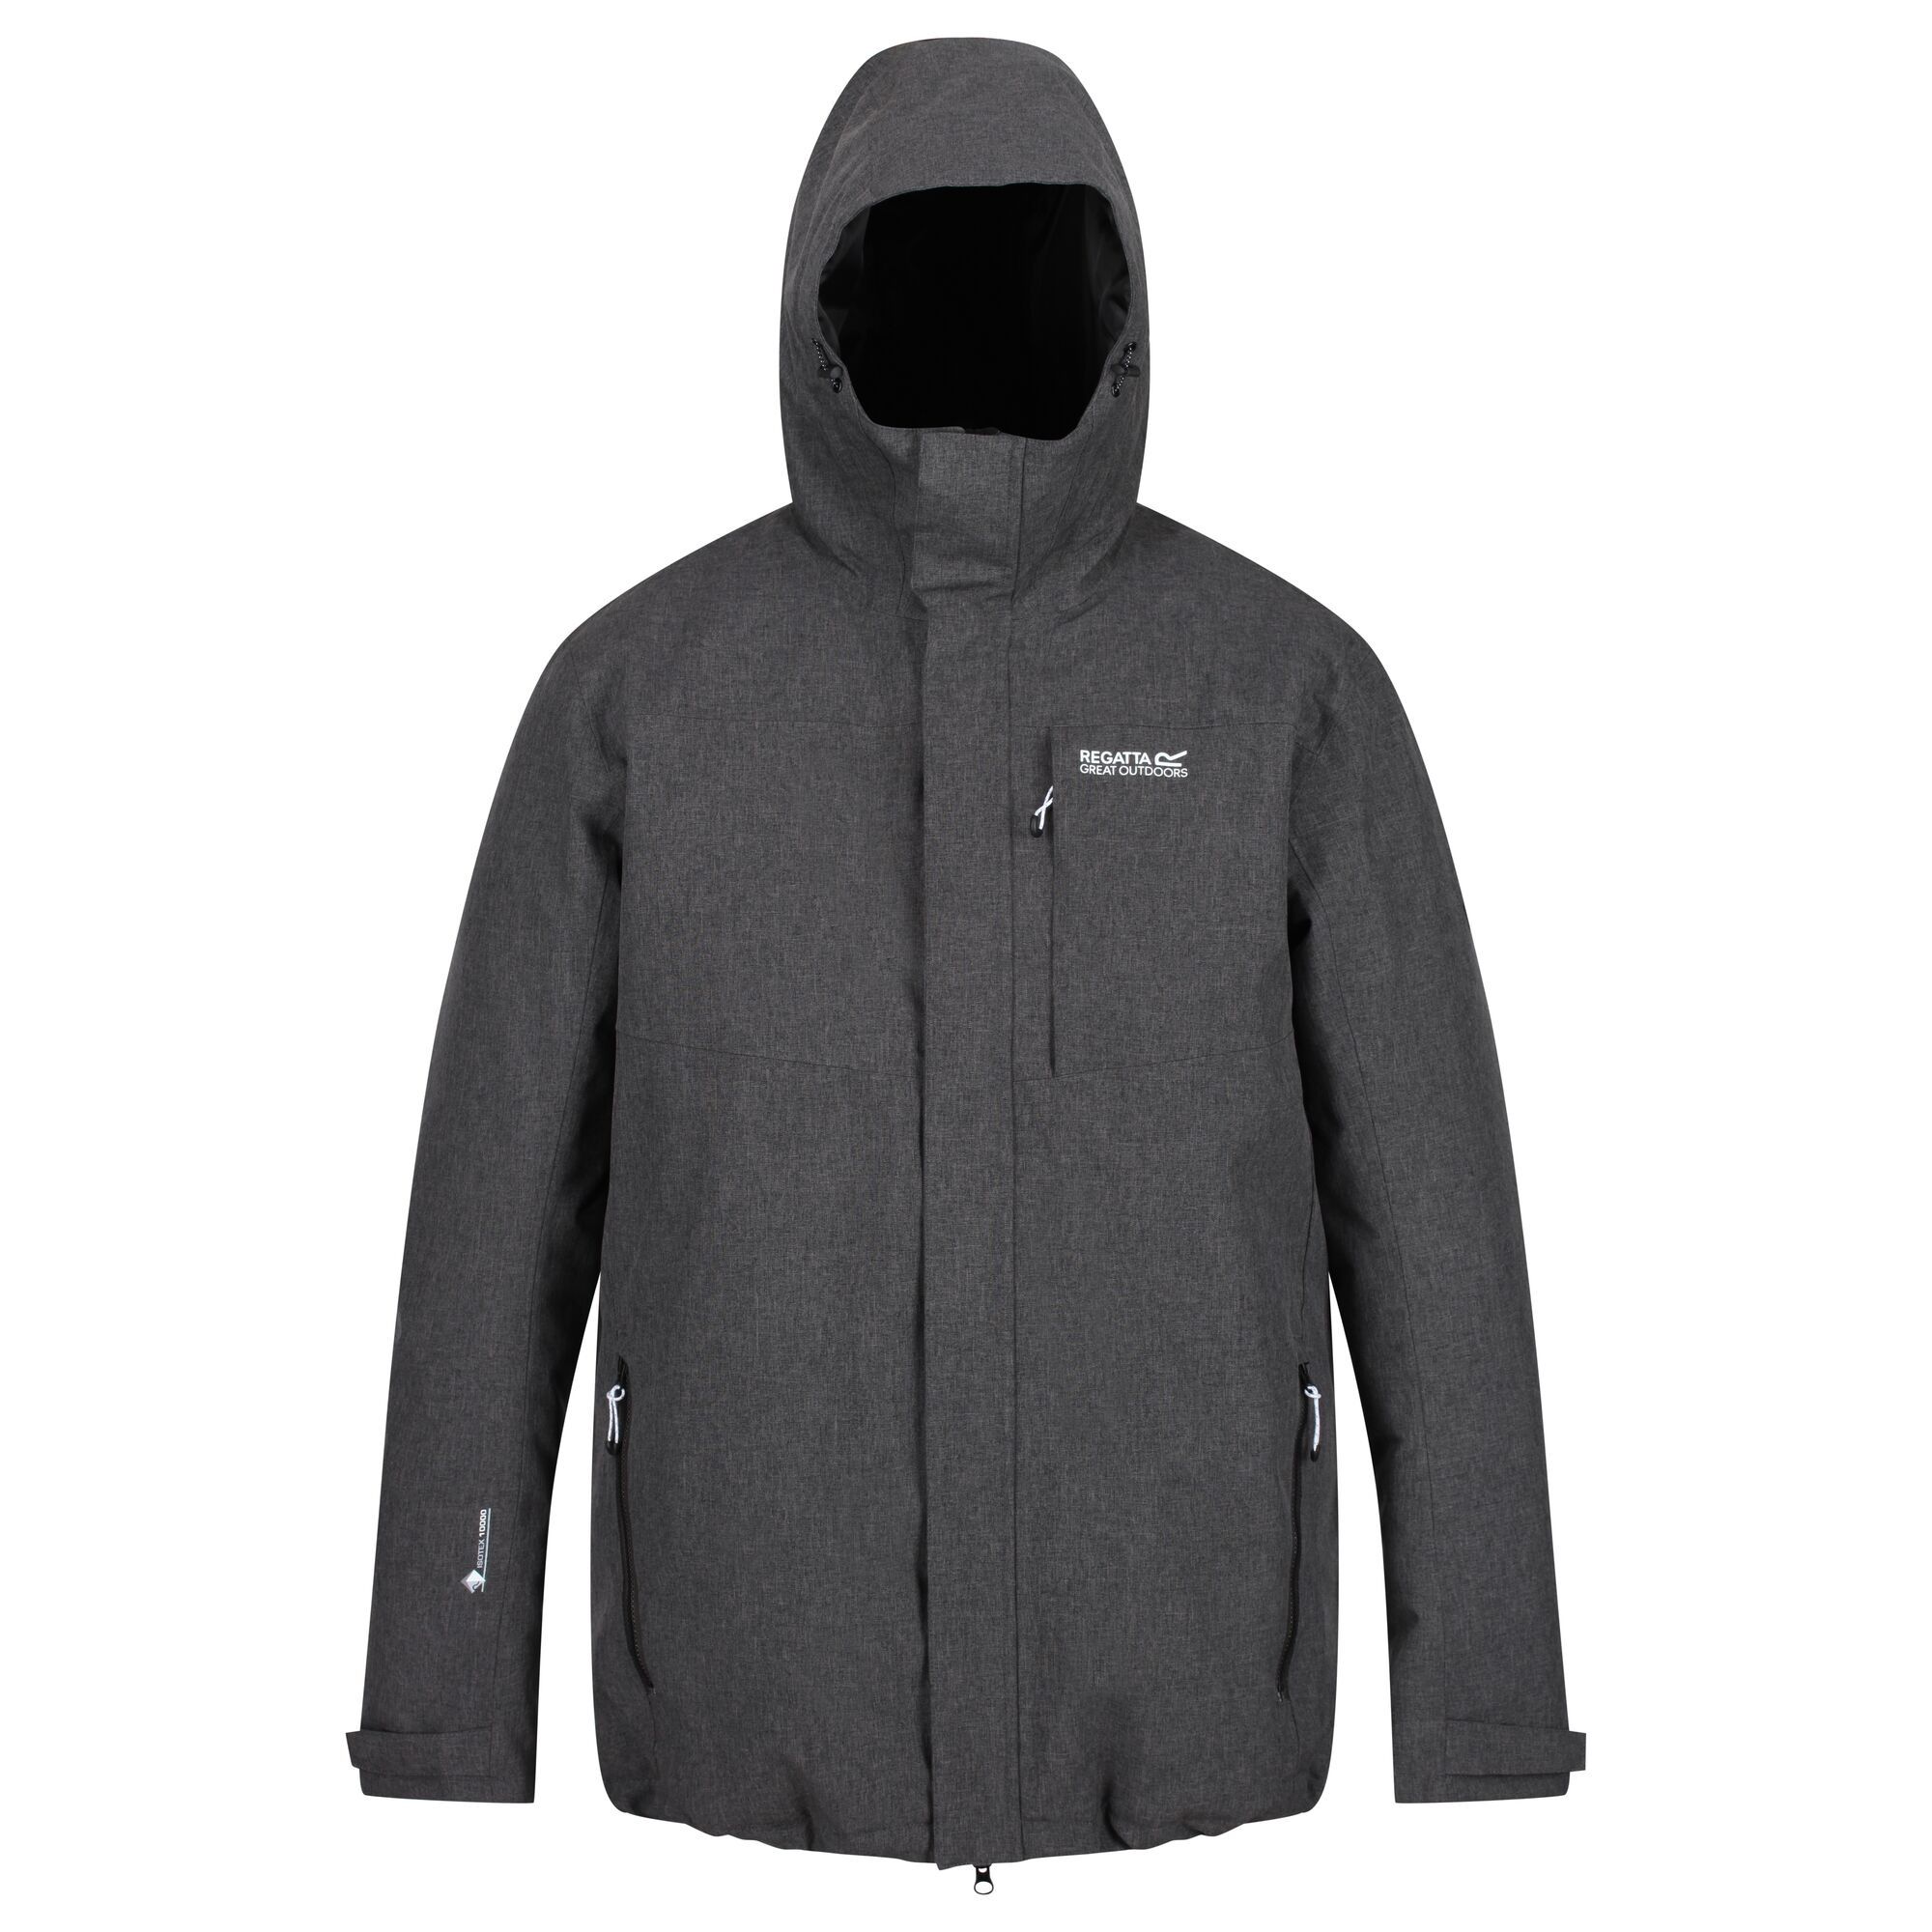 100% polyester marl. Durable water repellent finish. Thermo-guard insulation. With rechargeable copper heating zones: 2 heated chest panels and 1 heated back panel. Grown on hood with adjusters. 1 concealed chest zip pocket, 2 lower pockets and 1 inner zipped security pocket. Adjustable cuffs and shockcord hem.